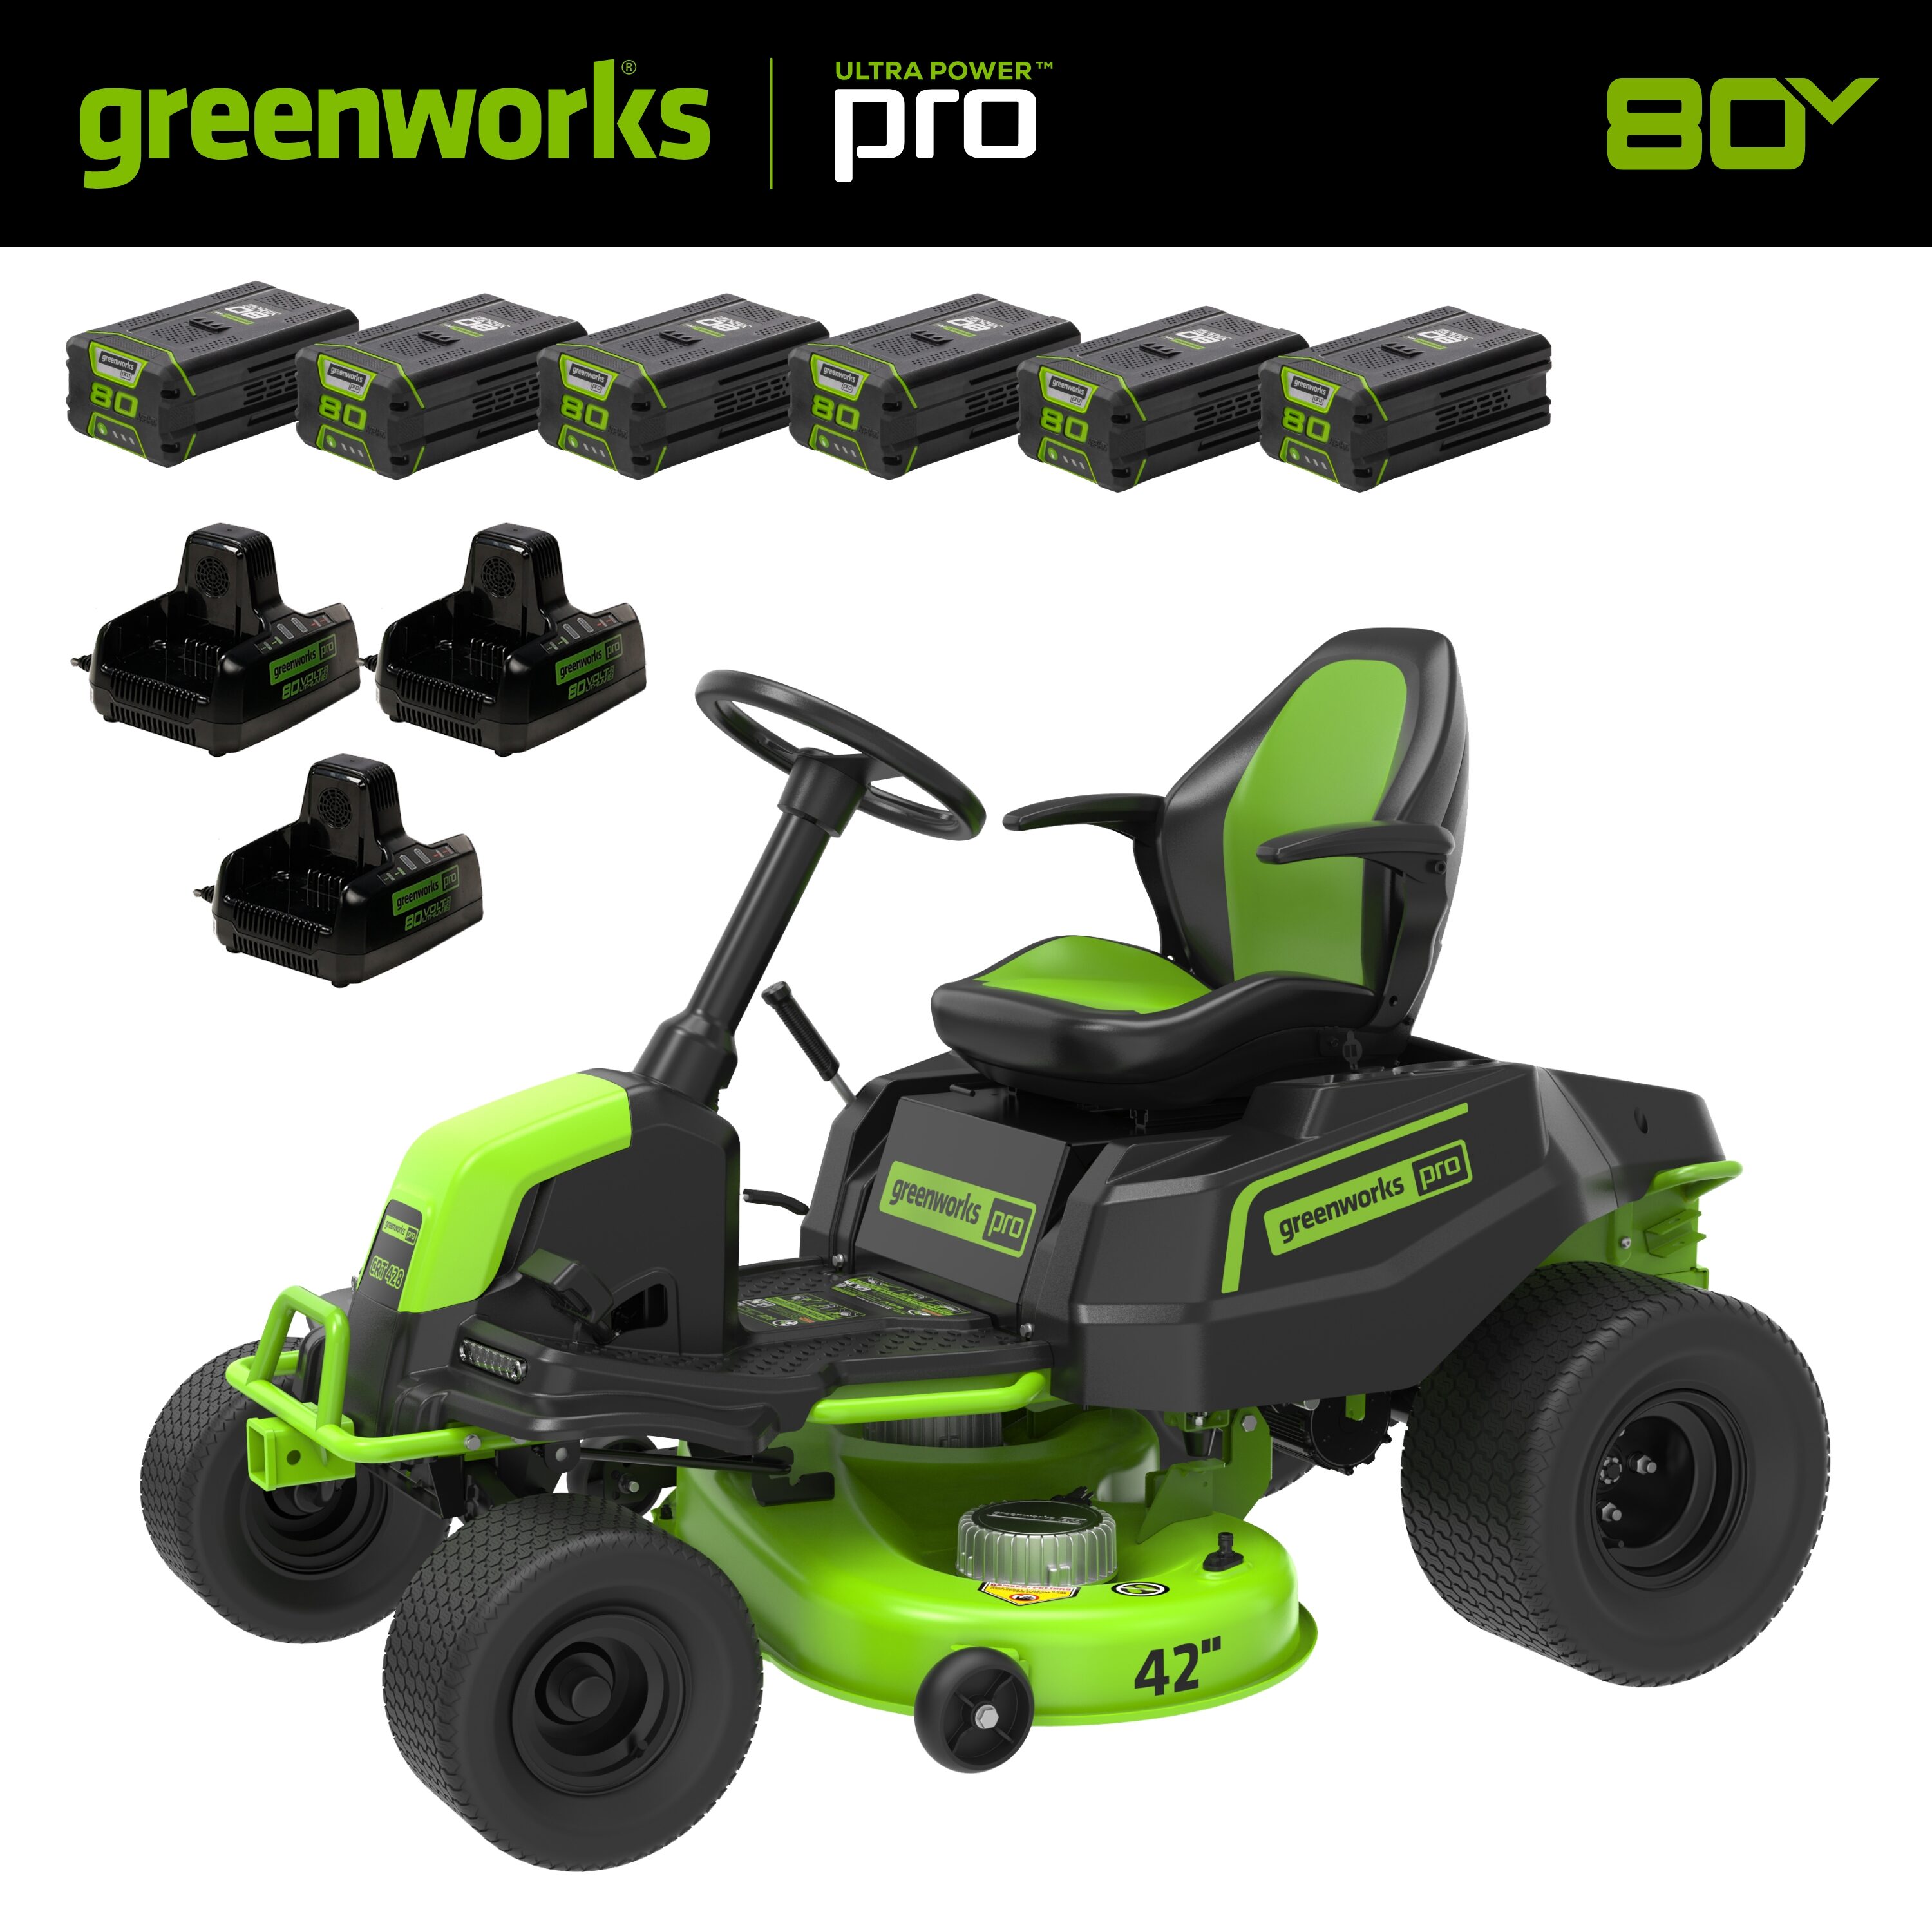 Tip Top Lawnmowers - Your Power Product Partner